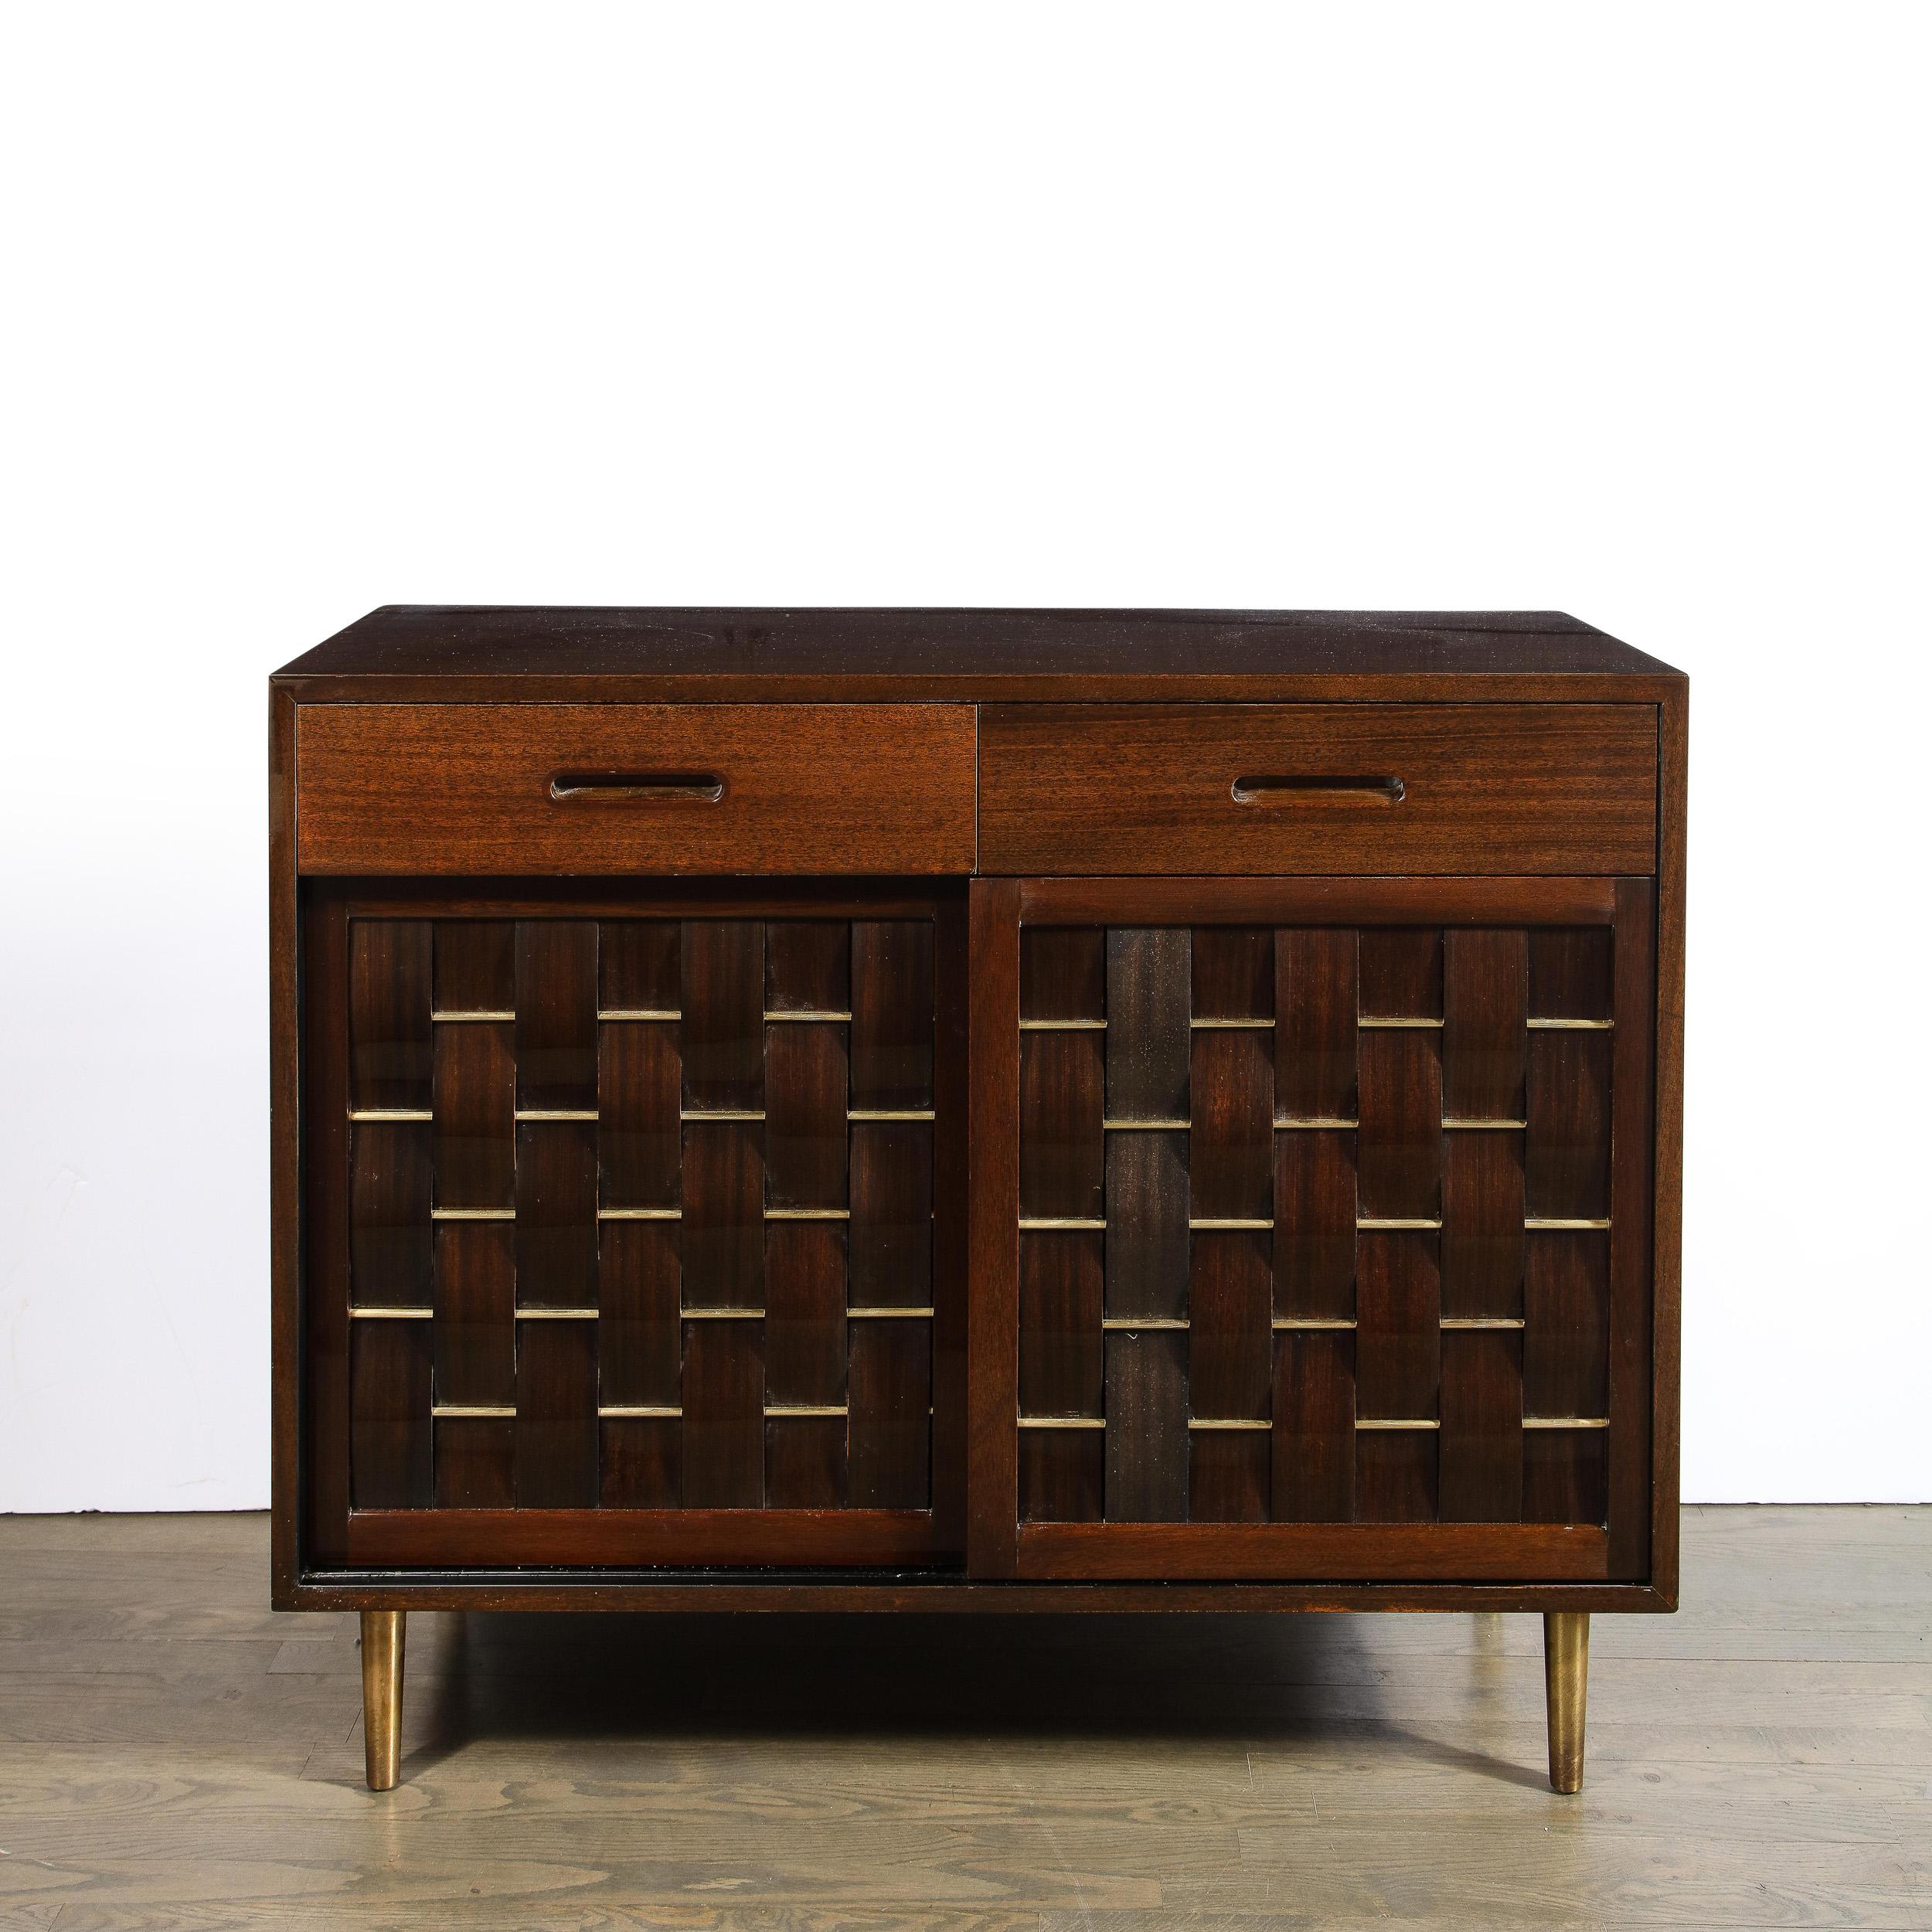 This stunning Mid-Century Modern chest was designed by Edward Wormley for the Dunbar Furniture Company in the United States circa 1955. It features a volumetric rectangular body sitting on four sculptural cylindrical brass legs. The front of the